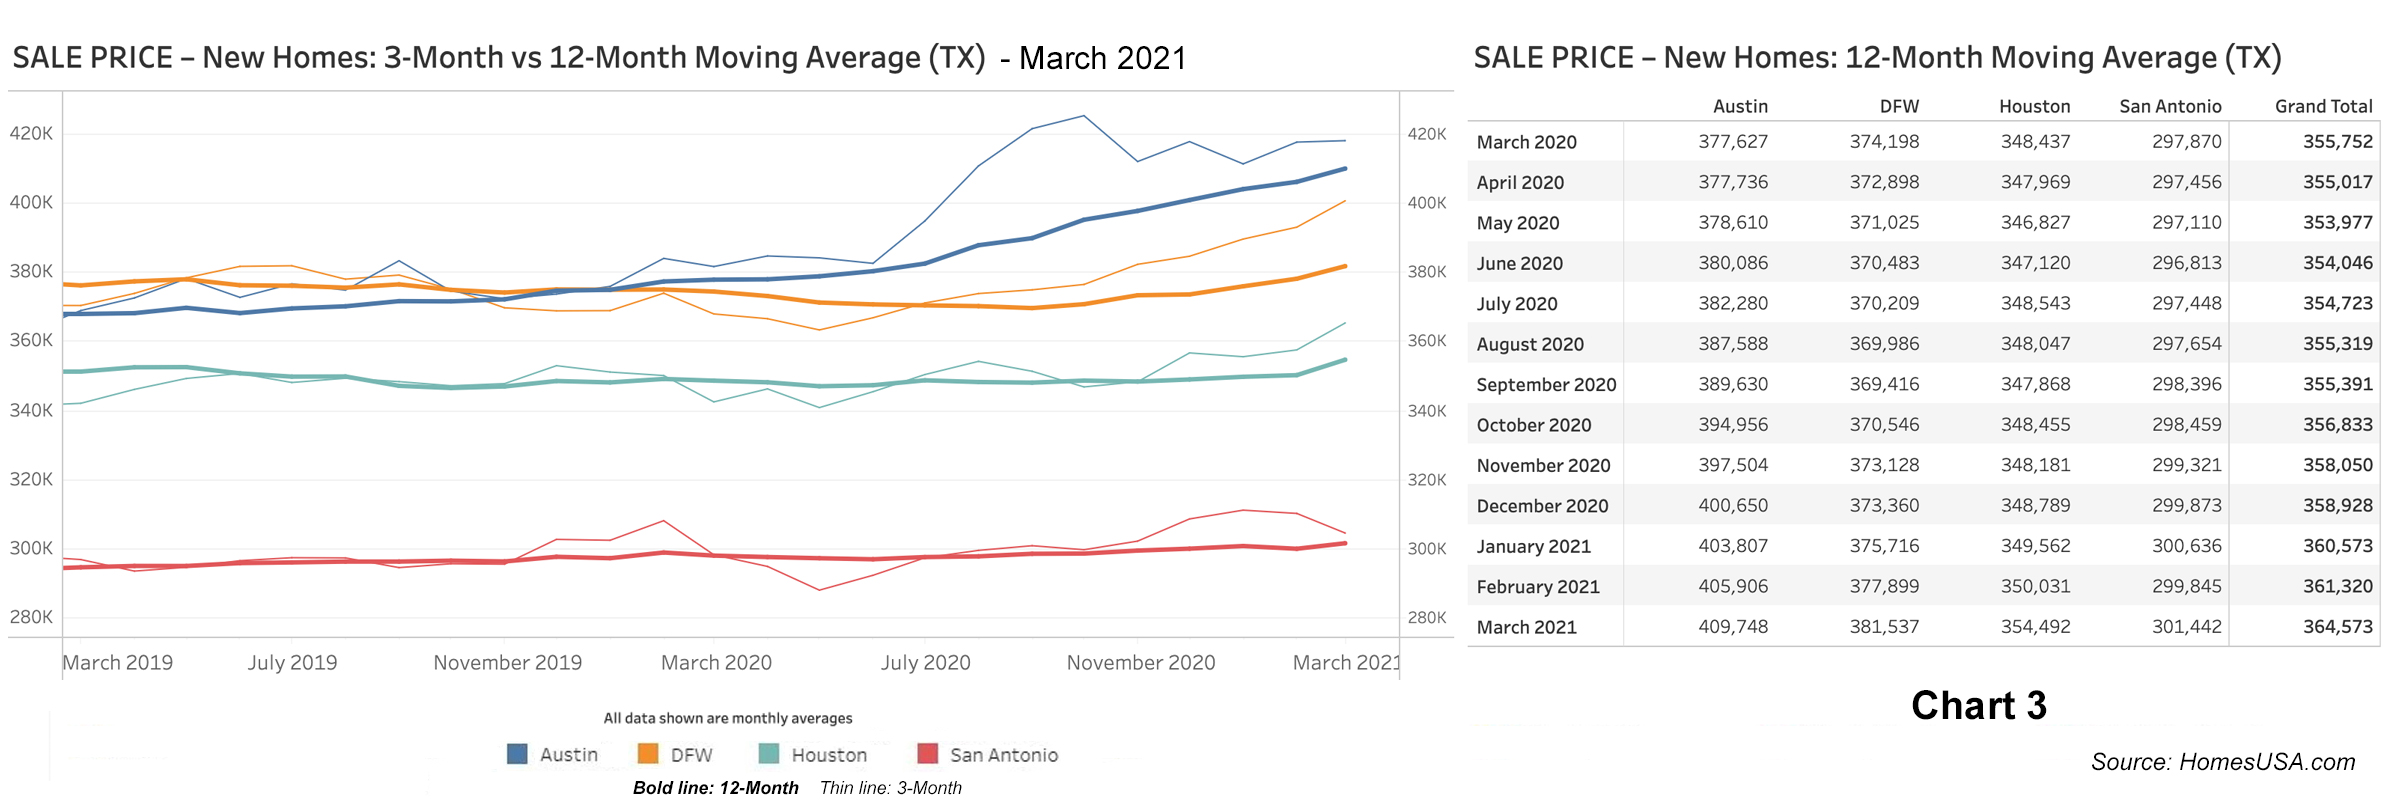 Chart 3: Texas New Home Prices - March 2021